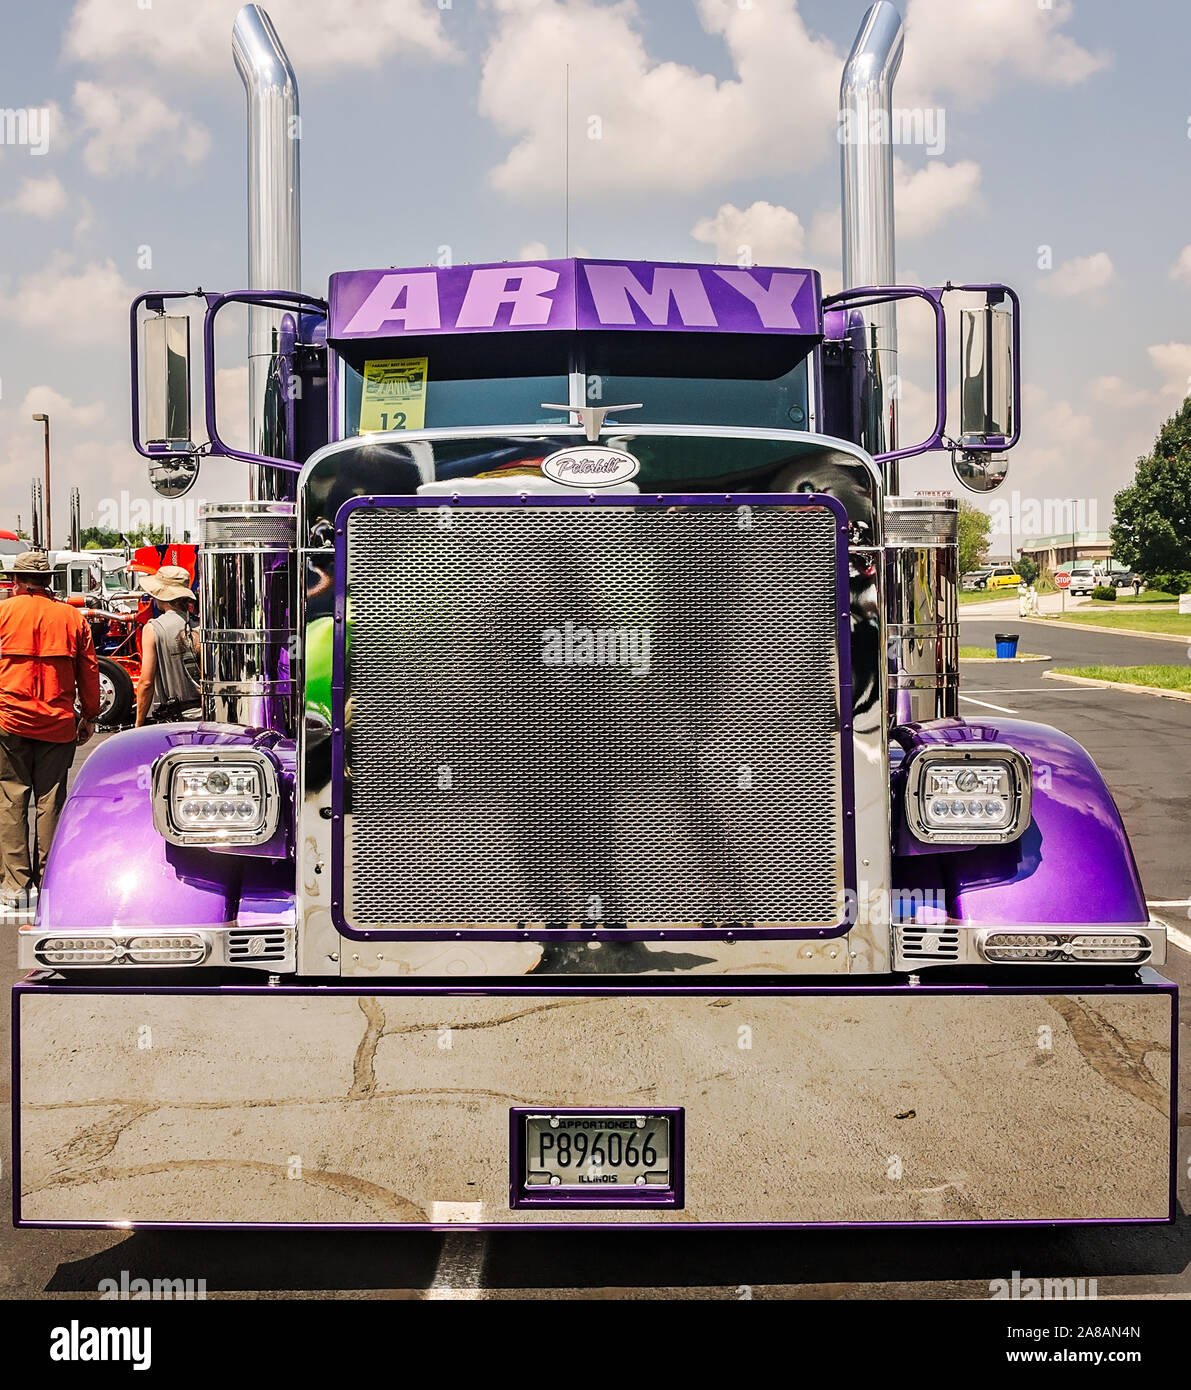 A 2006 Peterbilt 379 Flat Top waits to be judged at the 34th annual Shell Rotella SuperRigs truck beauty contest, June 11, 2016, in Joplin, Missouri. Stock Photo